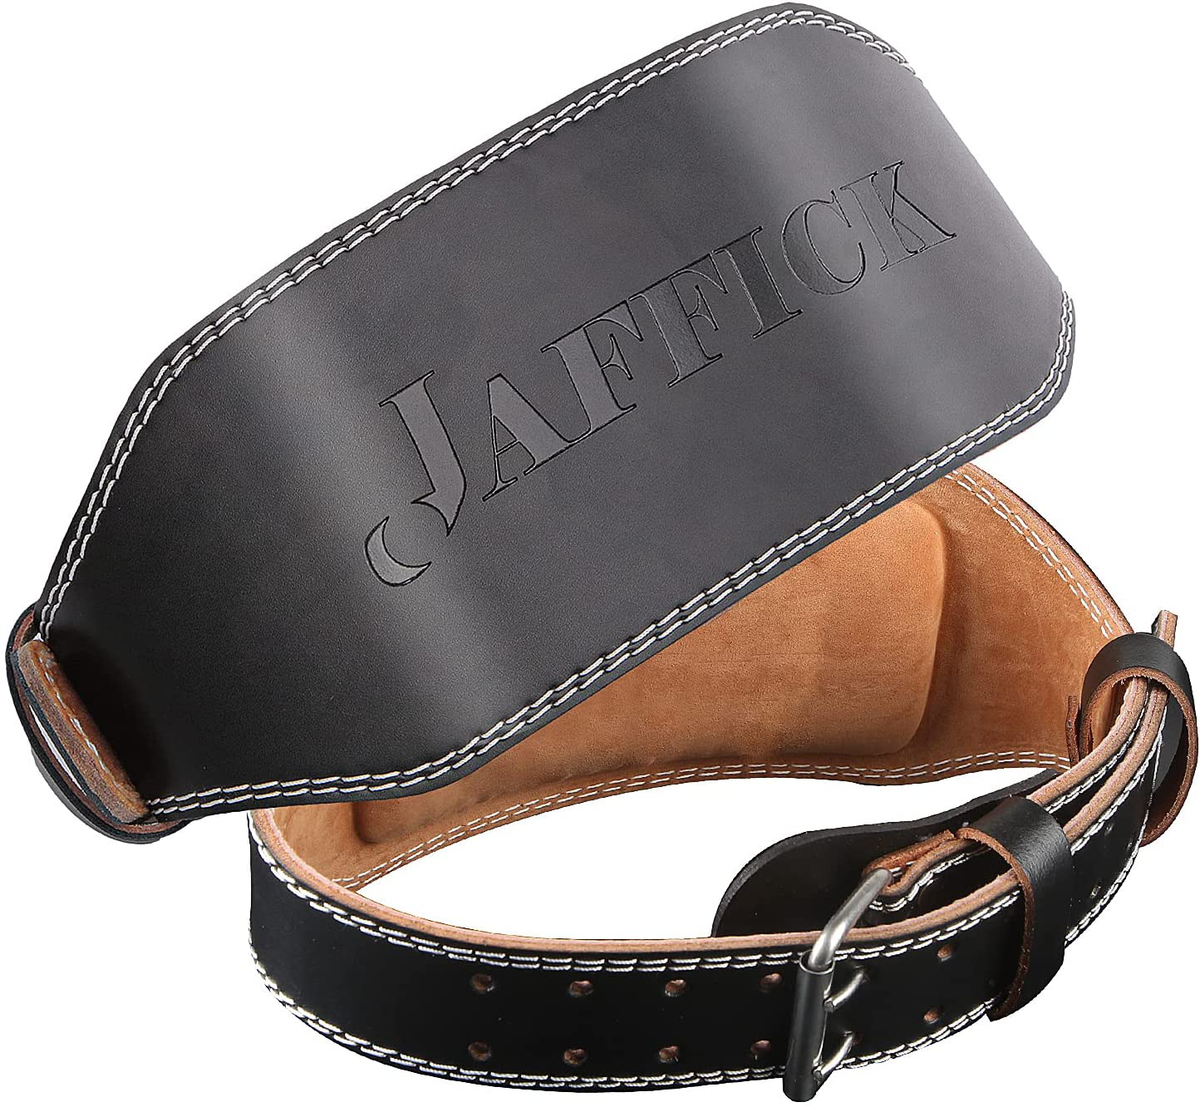  Jaffick Weight Lifting Belt For Ladies (4 Wide) - 100%  Leather Gym Belts Lower Waist Back Support For Women Men Fitness Squat  Deadlift Heavy Duty Cross Training Gym Powerlifting Workout 